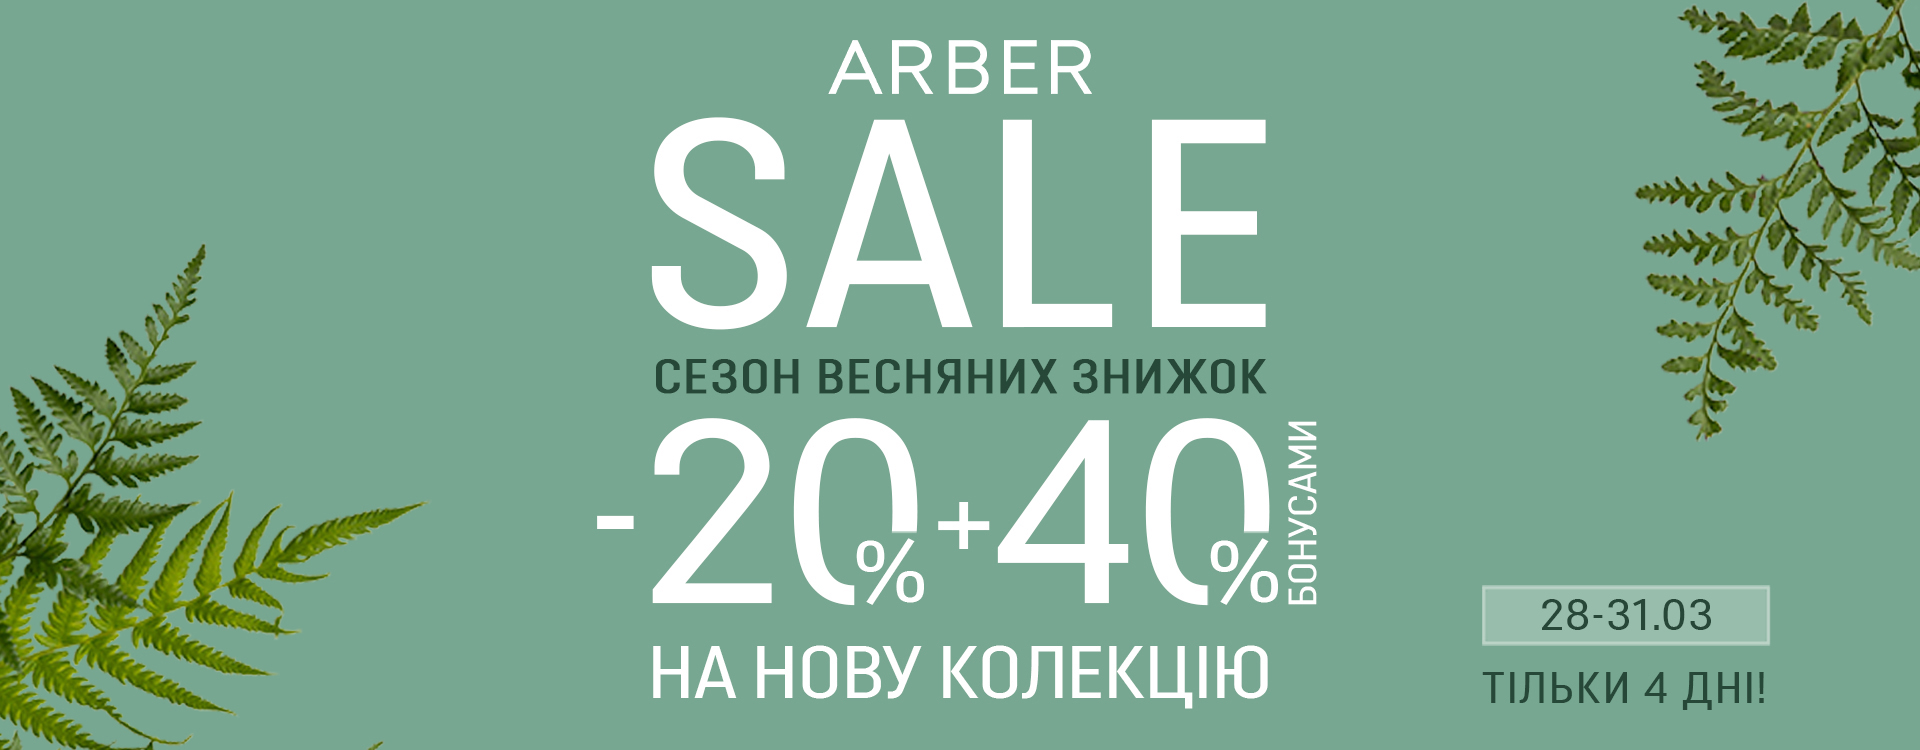 Spring discounts up to -20% in ARBER